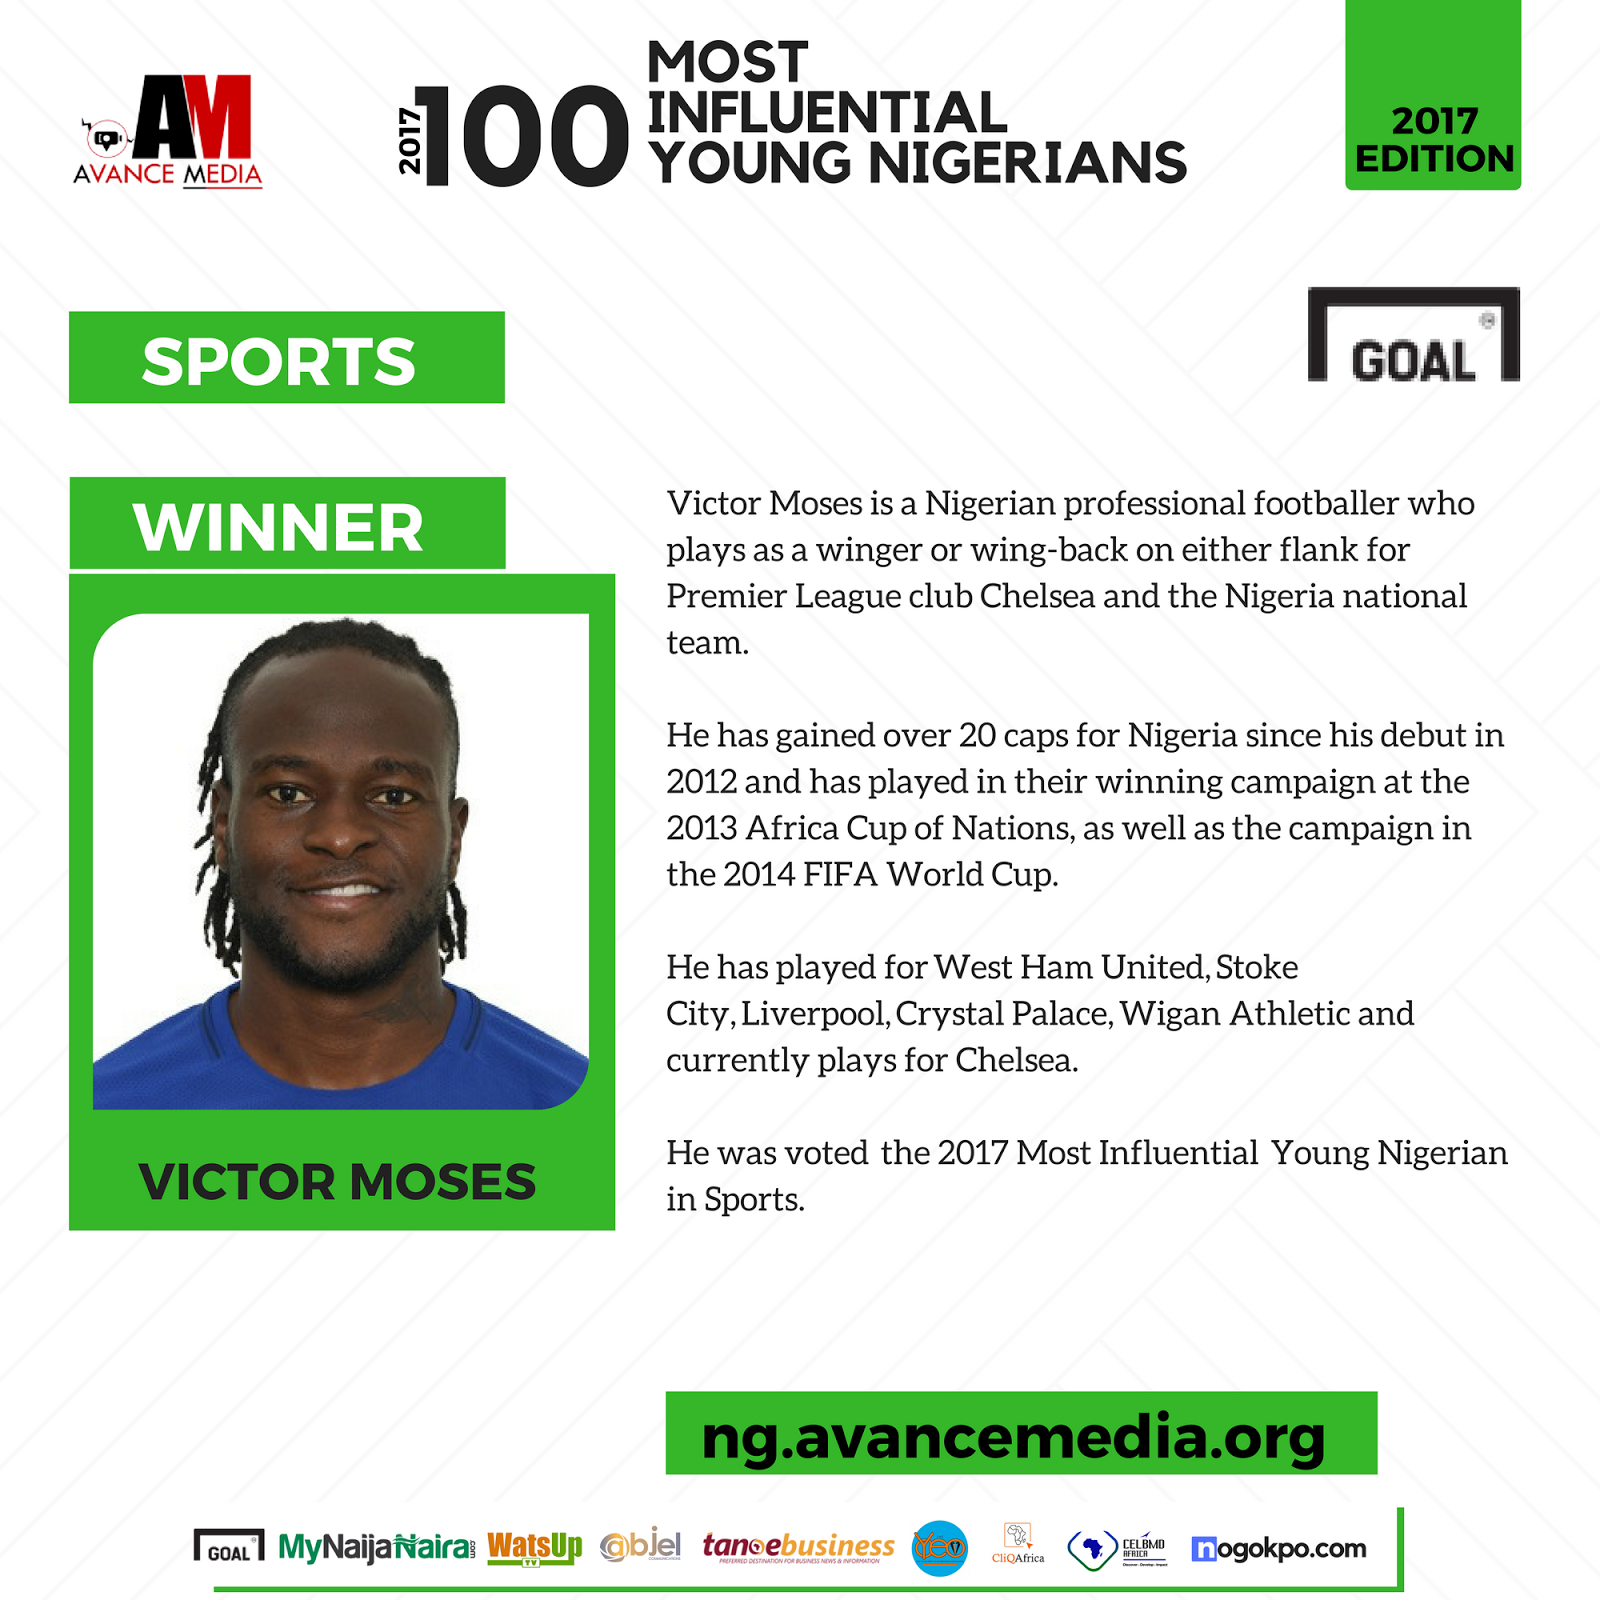 THE YCEO: VICTOR MOSES VOTED 2017 MOST INFLUENTIAL YOUNG NIGERIAN